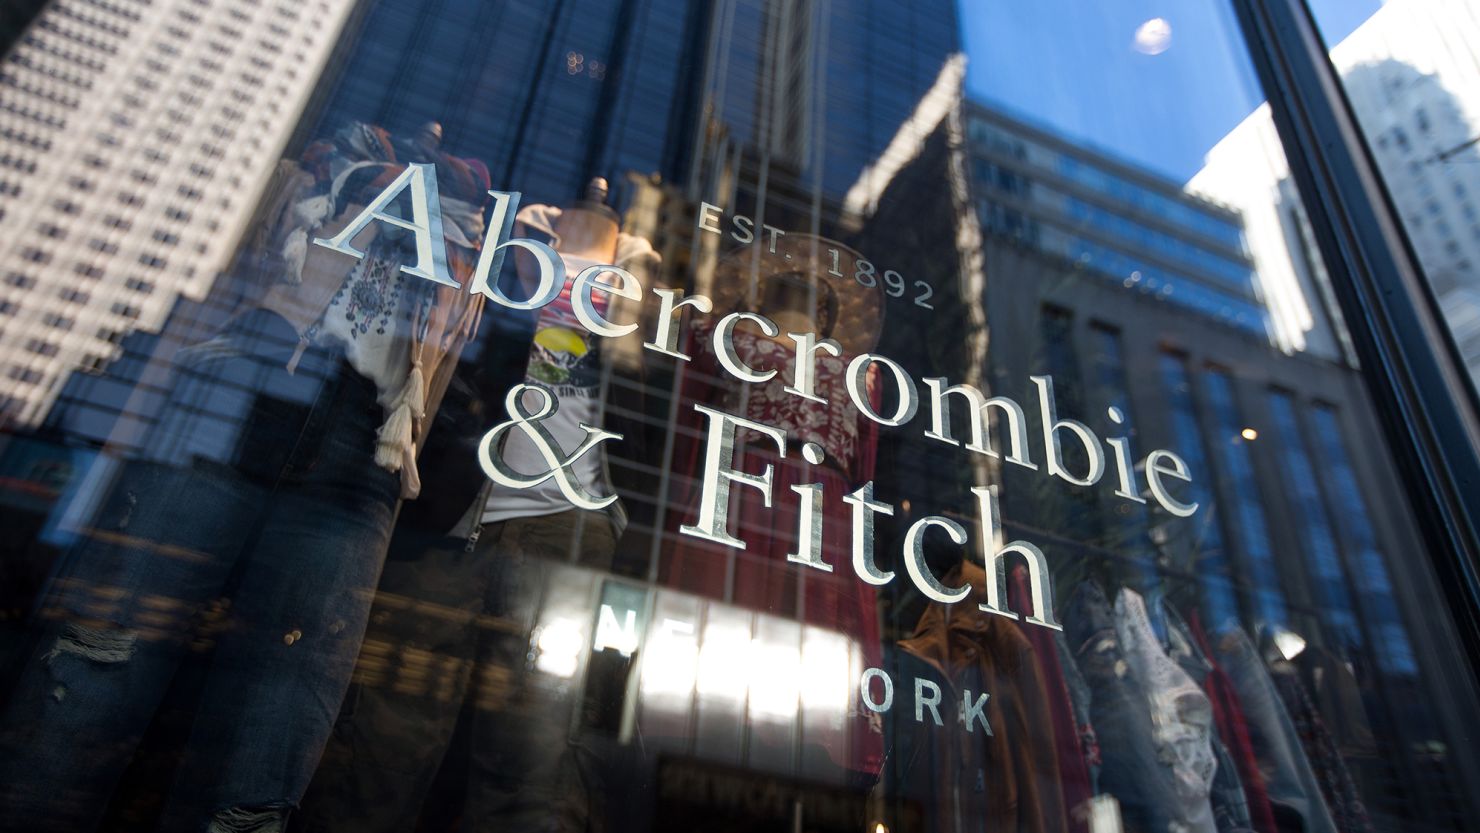 Abercrombie & Fitch Co. signage is displayed at the store on 5th Avenue in New York, U.S., on Sunday, Feb. 28, 2016. 